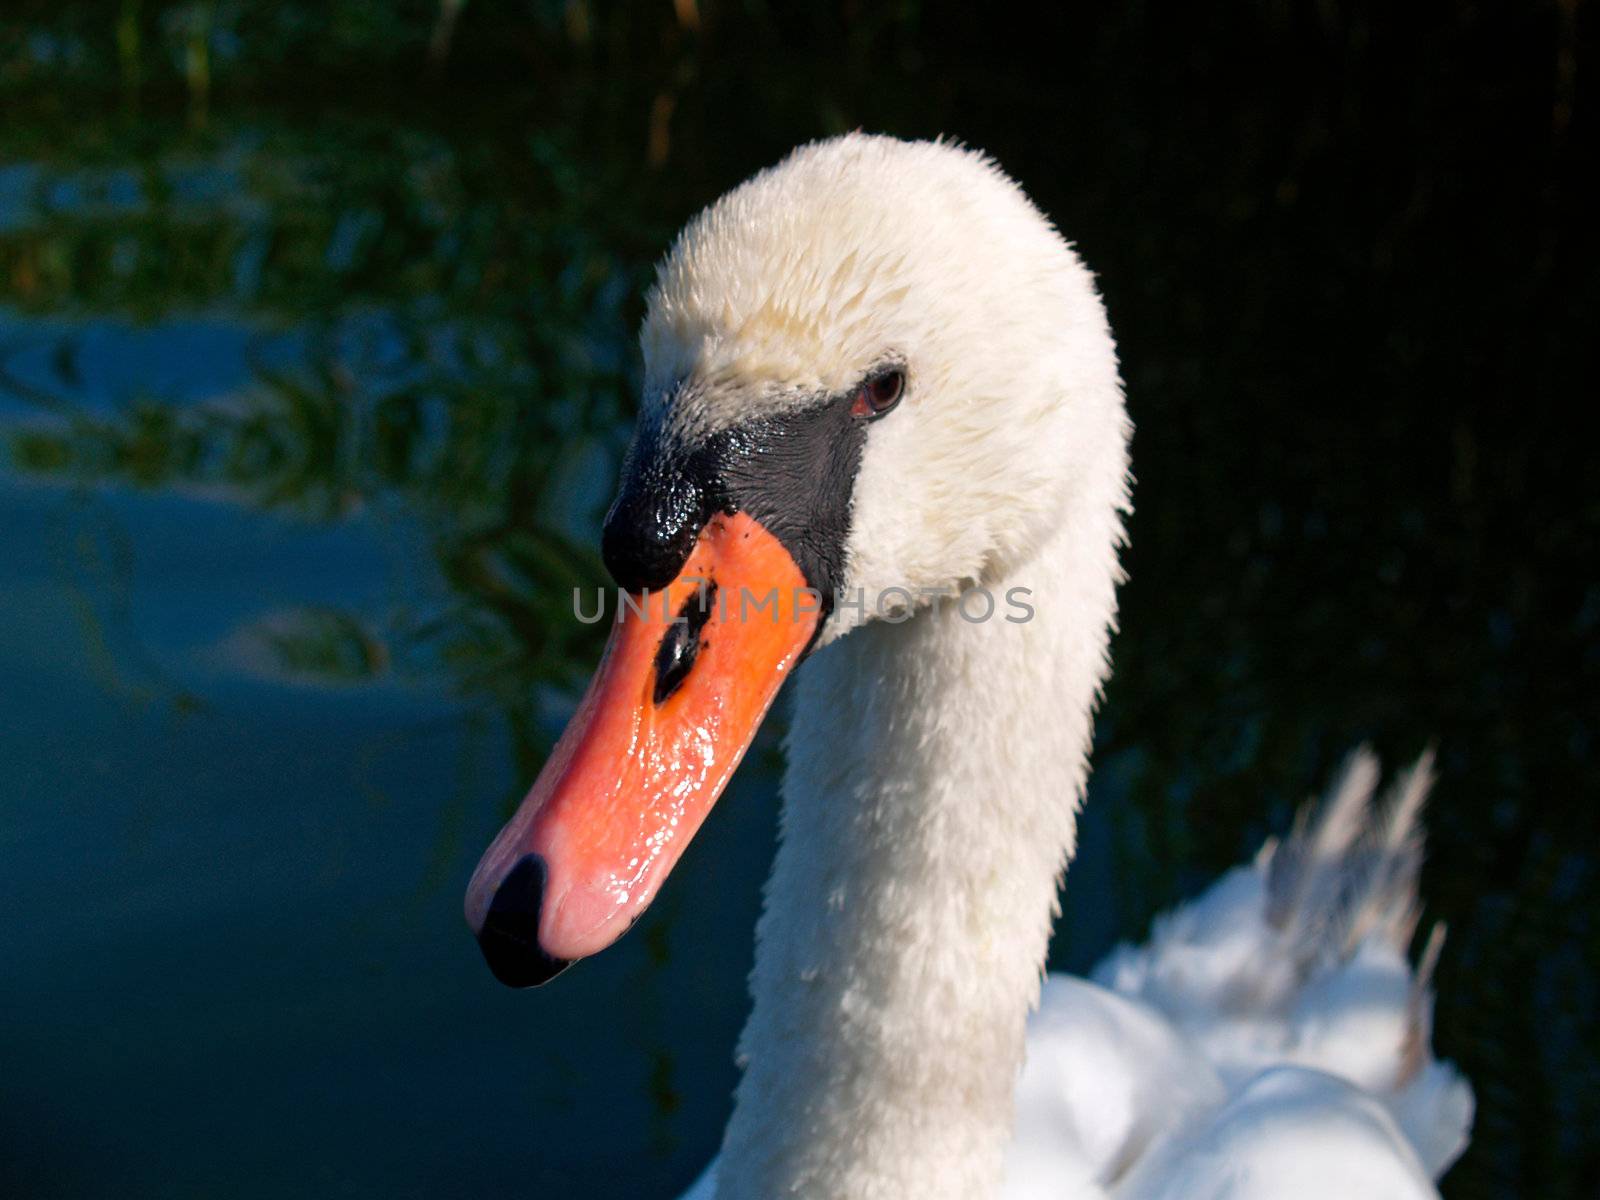 A mute swan on a lake on the island Usedom, Germany
